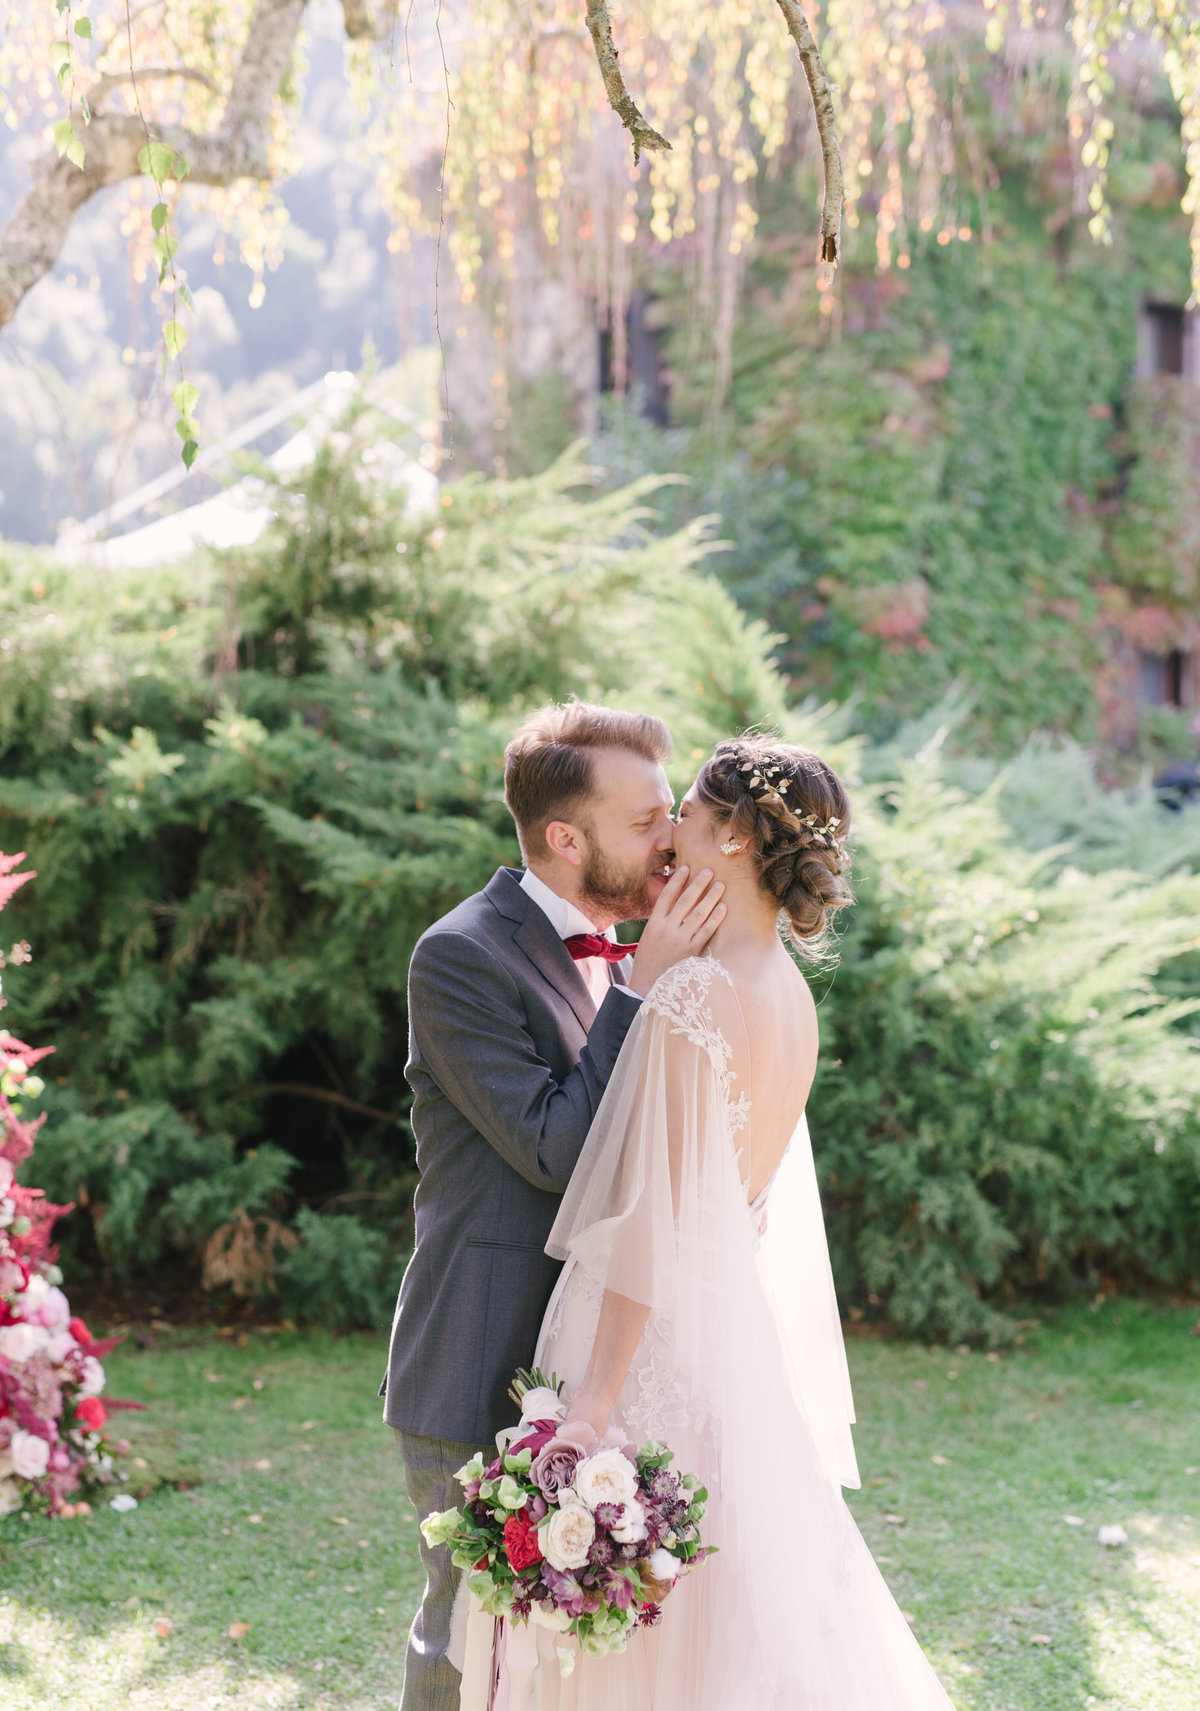 Magical forest wedding inspire